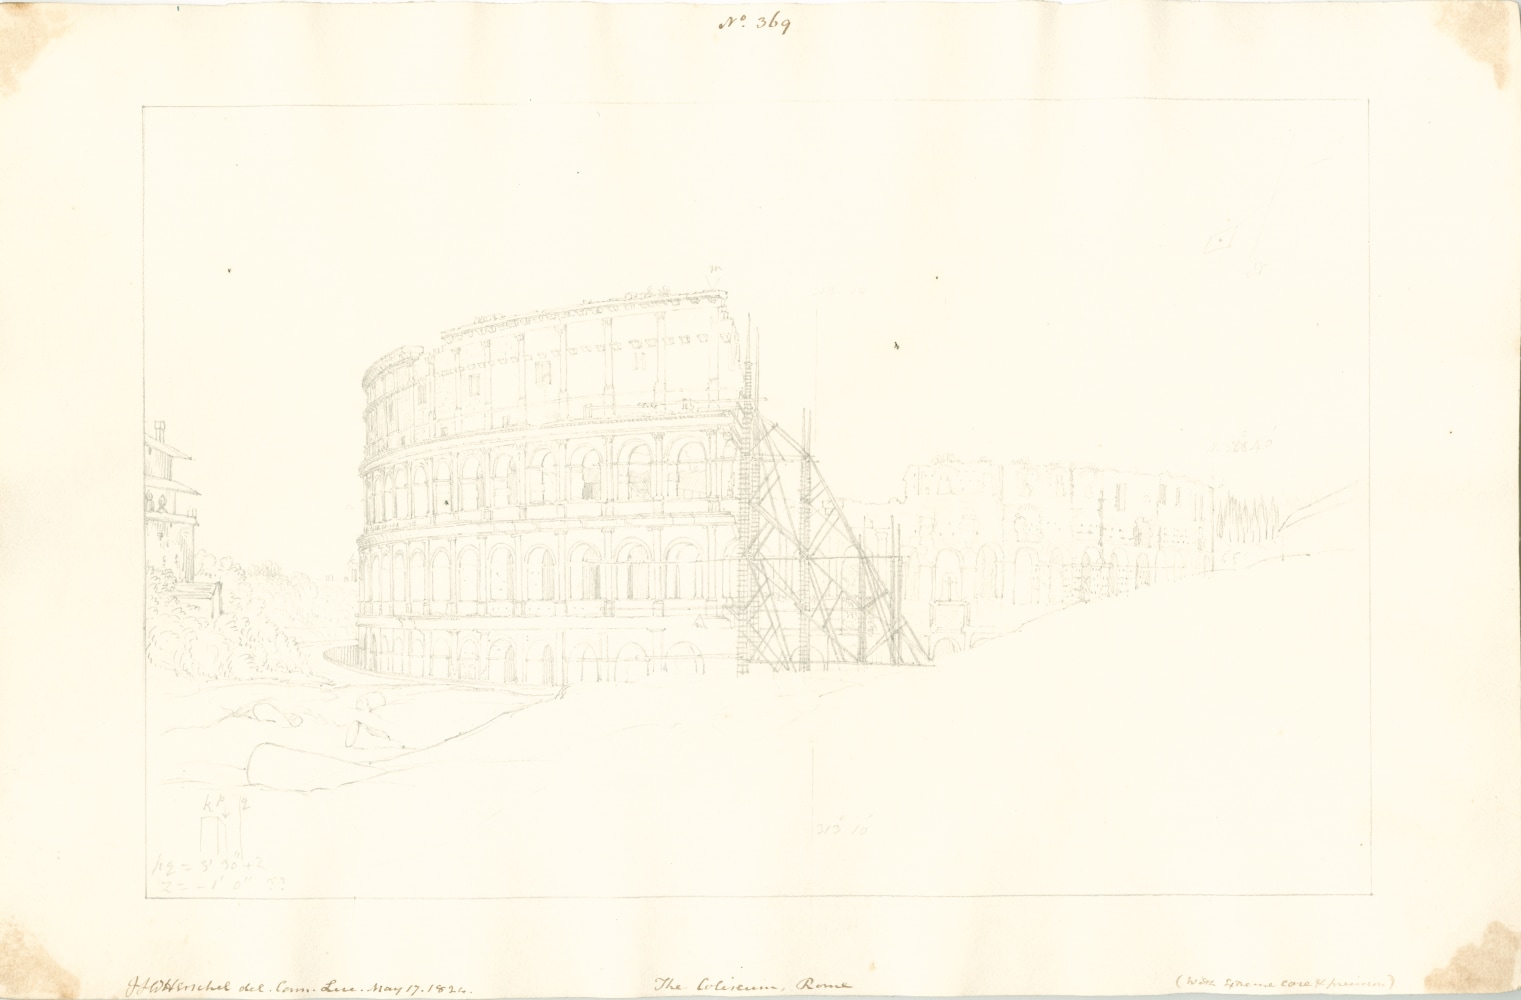 Sir John Frederick William HERSCHEL (English, 1792-1872) &quot;No 369 The Coliseum, Rome (with extreme care &amp; precision).&quot;, 17 May 1824 Camera lucida drawing, pencil on paper 20.1 x 30.9 cm on 25.2 x 38.6 cm paper Numbered, signed, dated and titled “No 369 / JFW Herschel del. Cam. Luc. May 17, 1824. / The Coliseum, Rome / (with extreme care &amp; precision).” in ink in border. Inscribed “Coliseum” in pencil on verso Inventory #301377.11